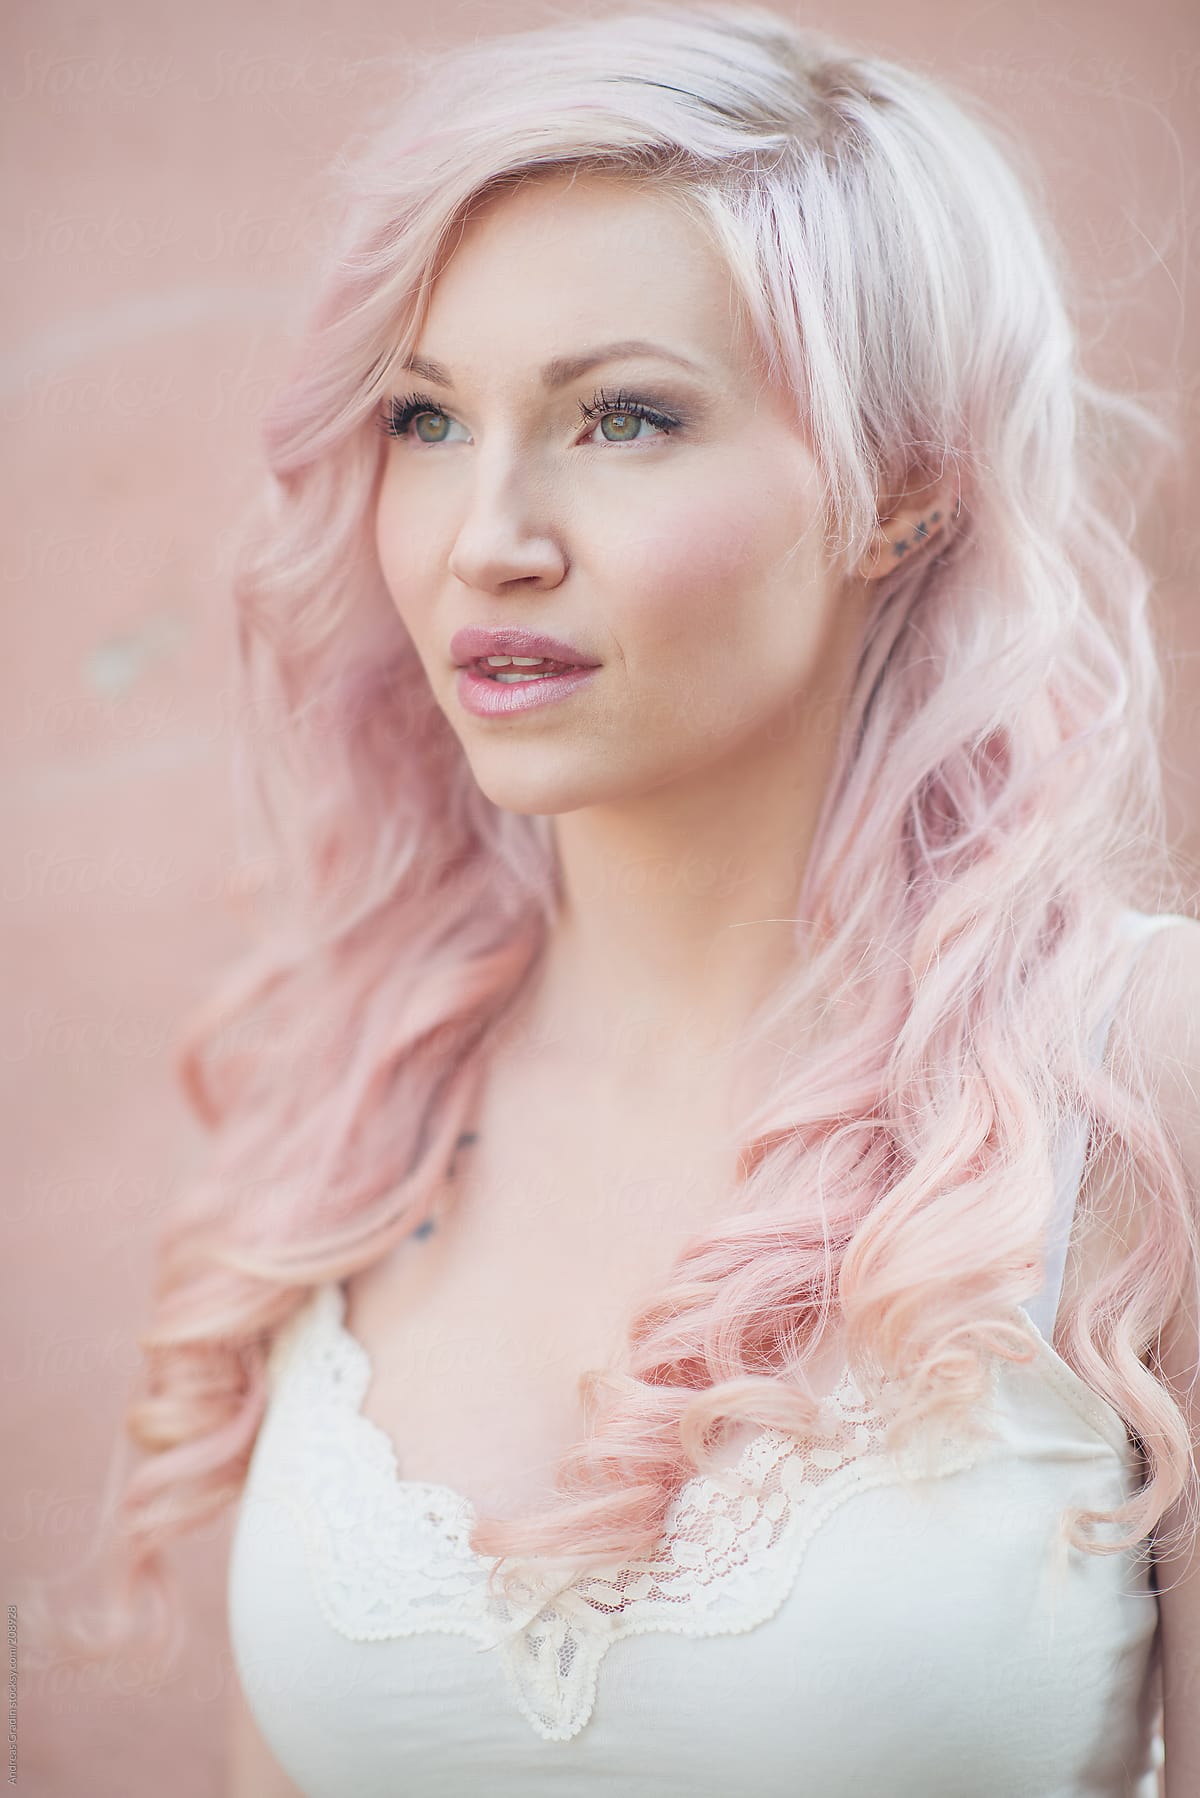 Girl With Pastel Pink And Blonde Hair By Andreas Gradin Stocksy